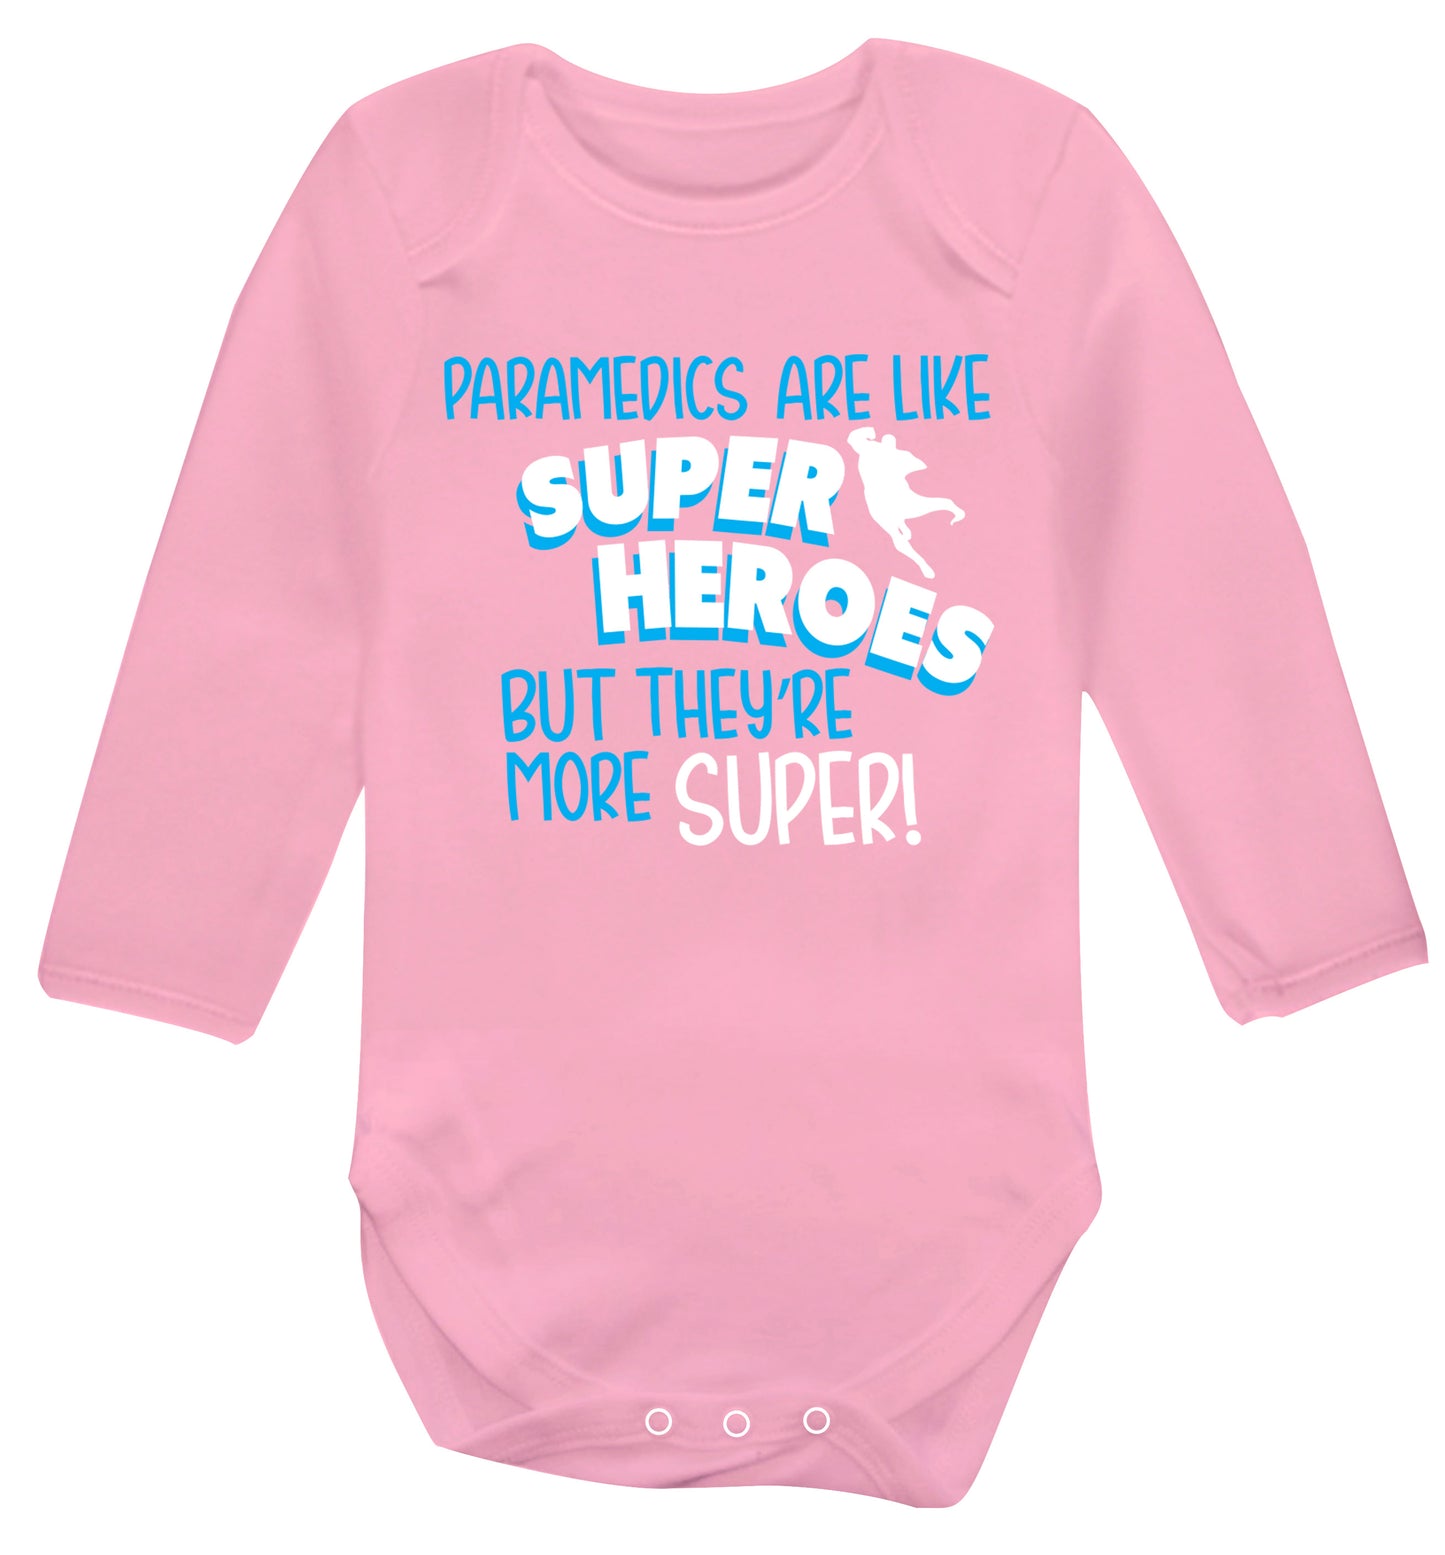 Paramedics are like superheros but they're more super Baby Vest long sleeved pale pink 6-12 months